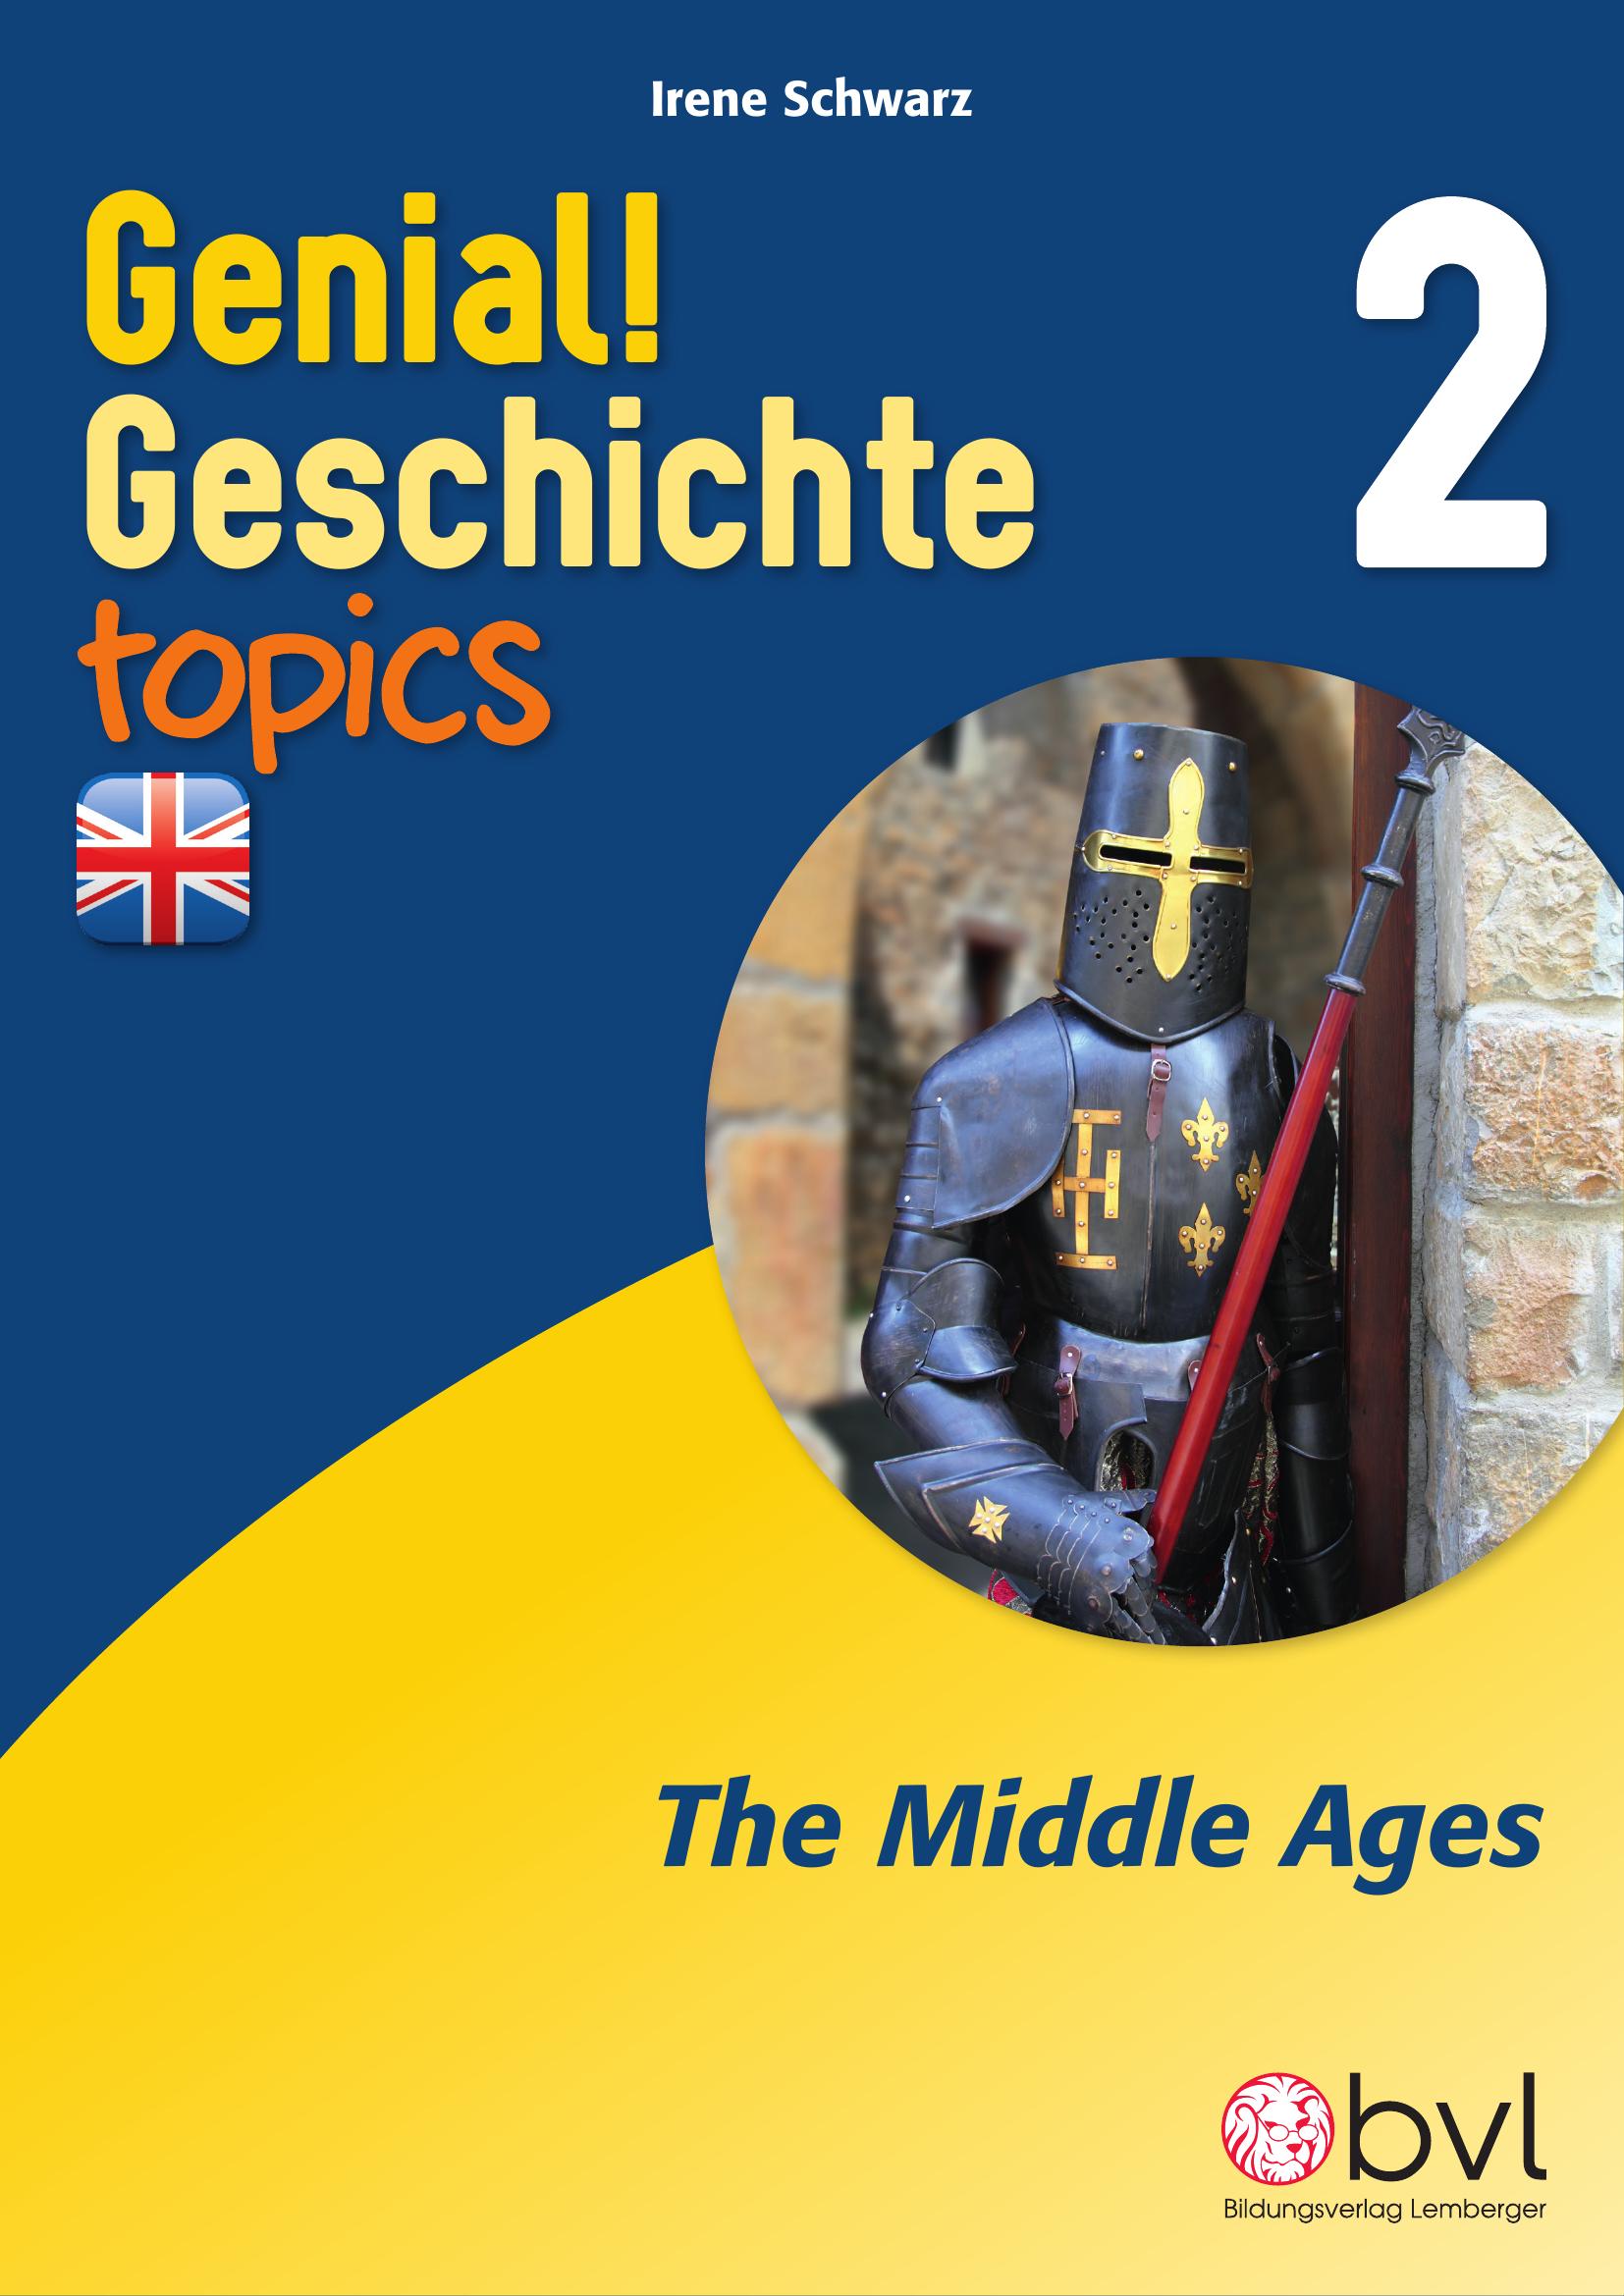 Genial! Geschichte 2 – topics 5: The Middle Ages